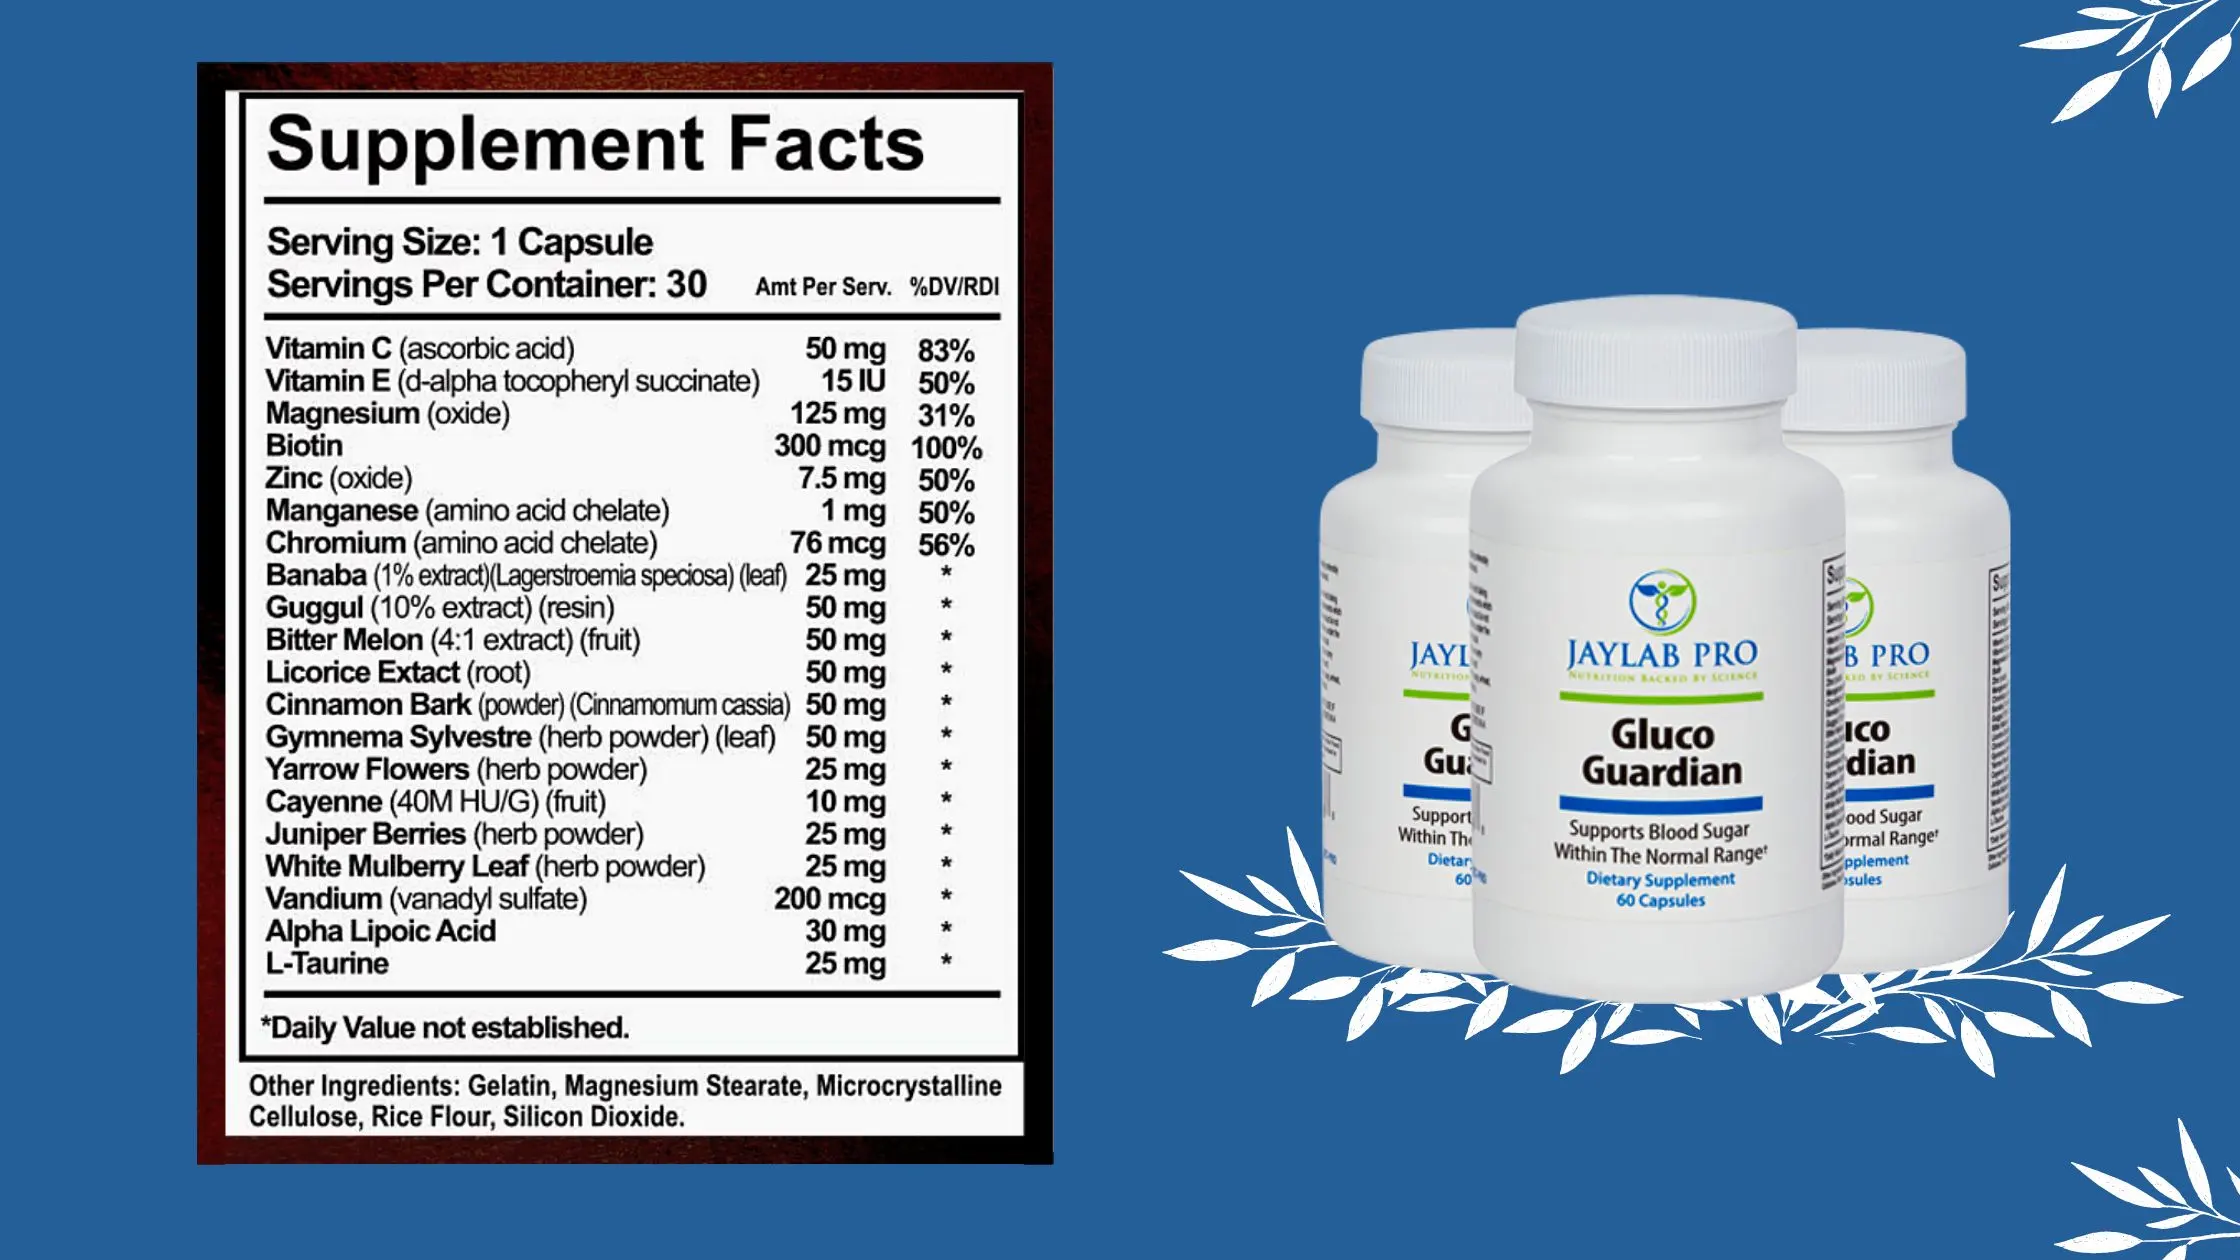 Gluco Guardian Supplement Facts